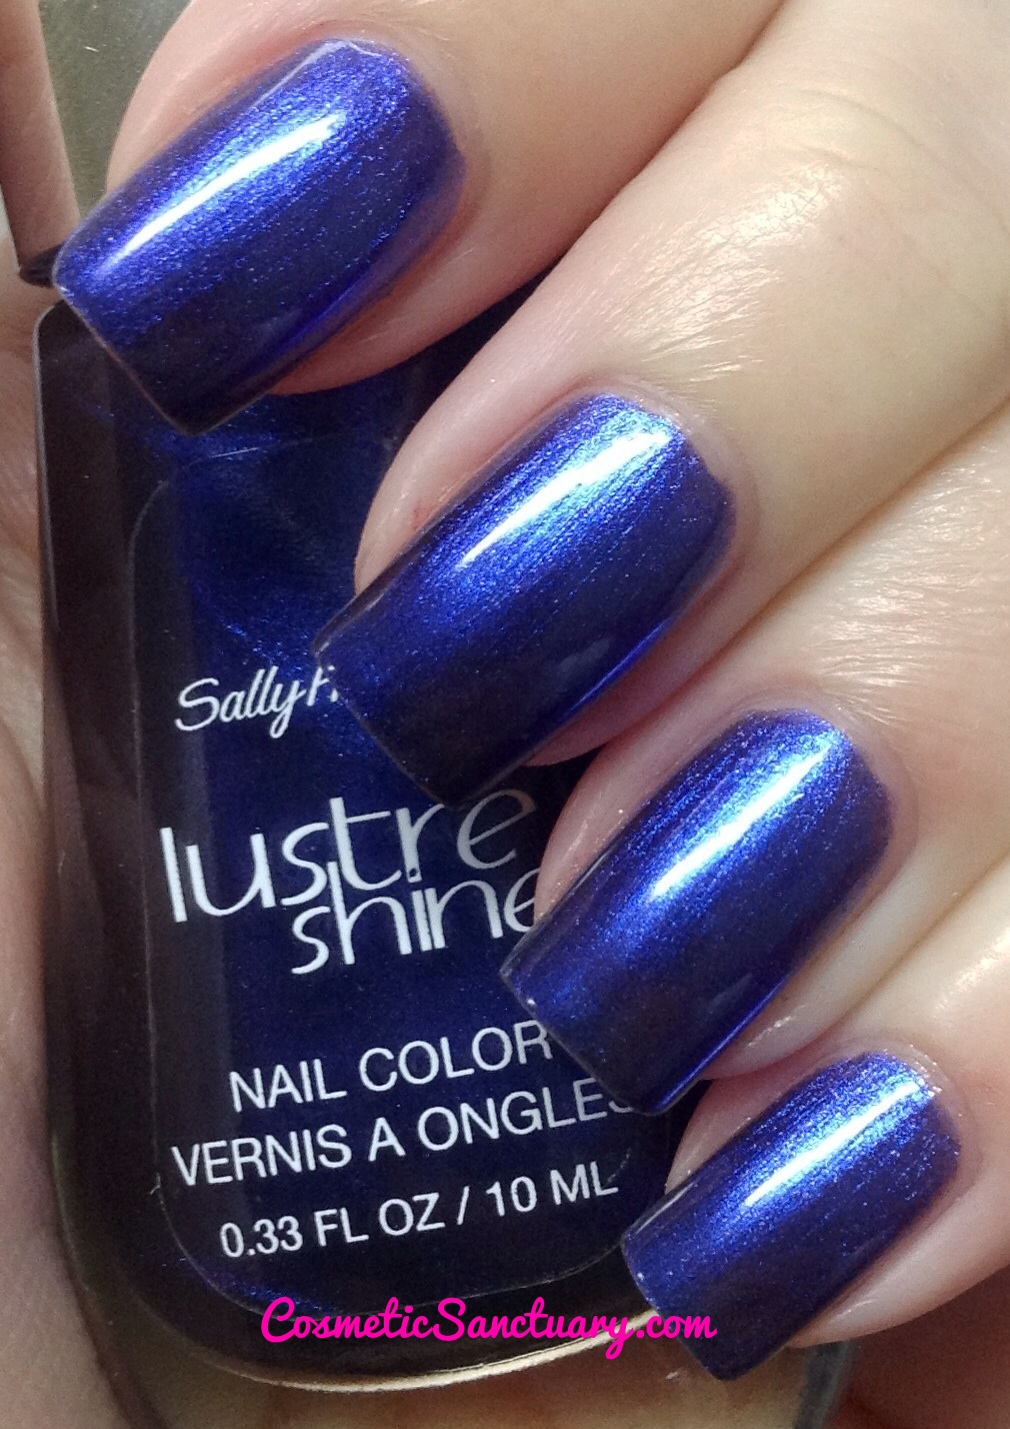 Sally Hansen Lustre Shine Swatches and Review